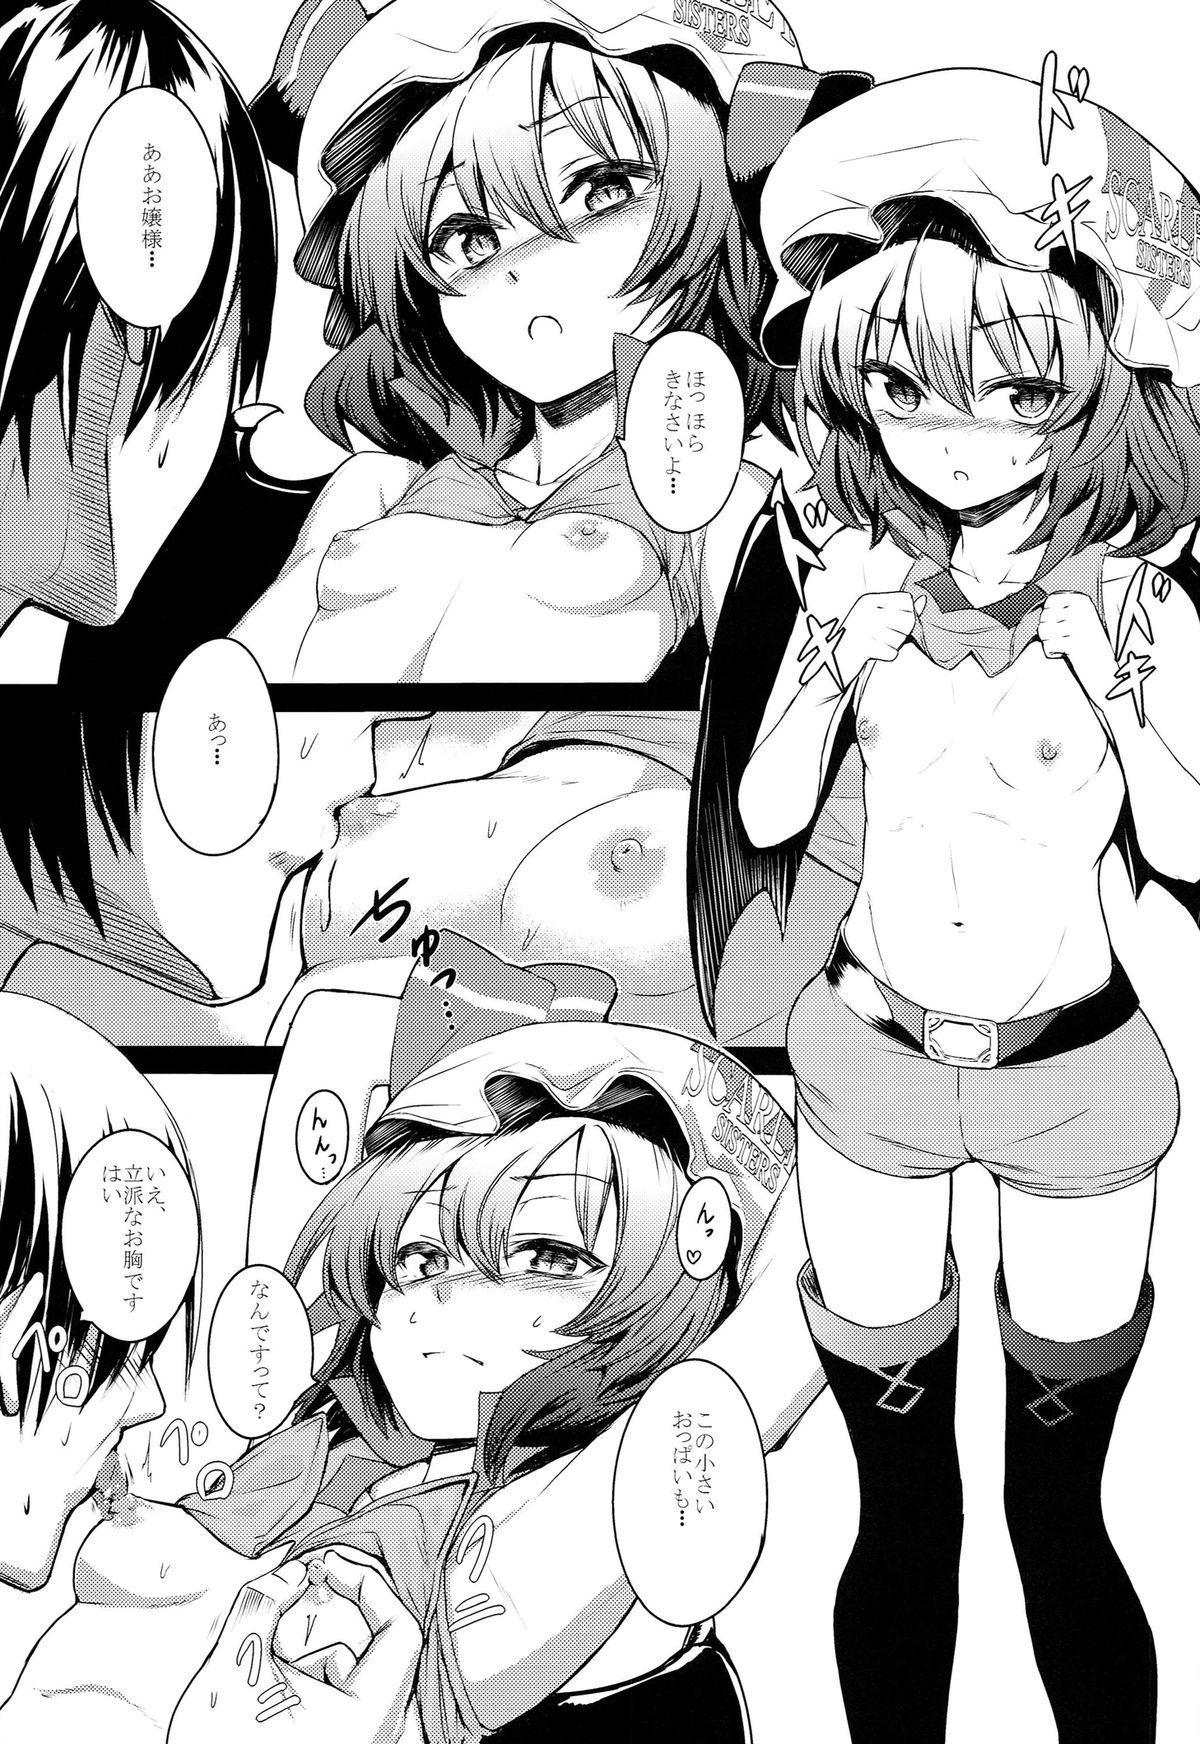 Free Blowjob TOUHOU RACE QUEENS COLLABO CLUB - Touhou project 18 Year Old Porn - Page 6